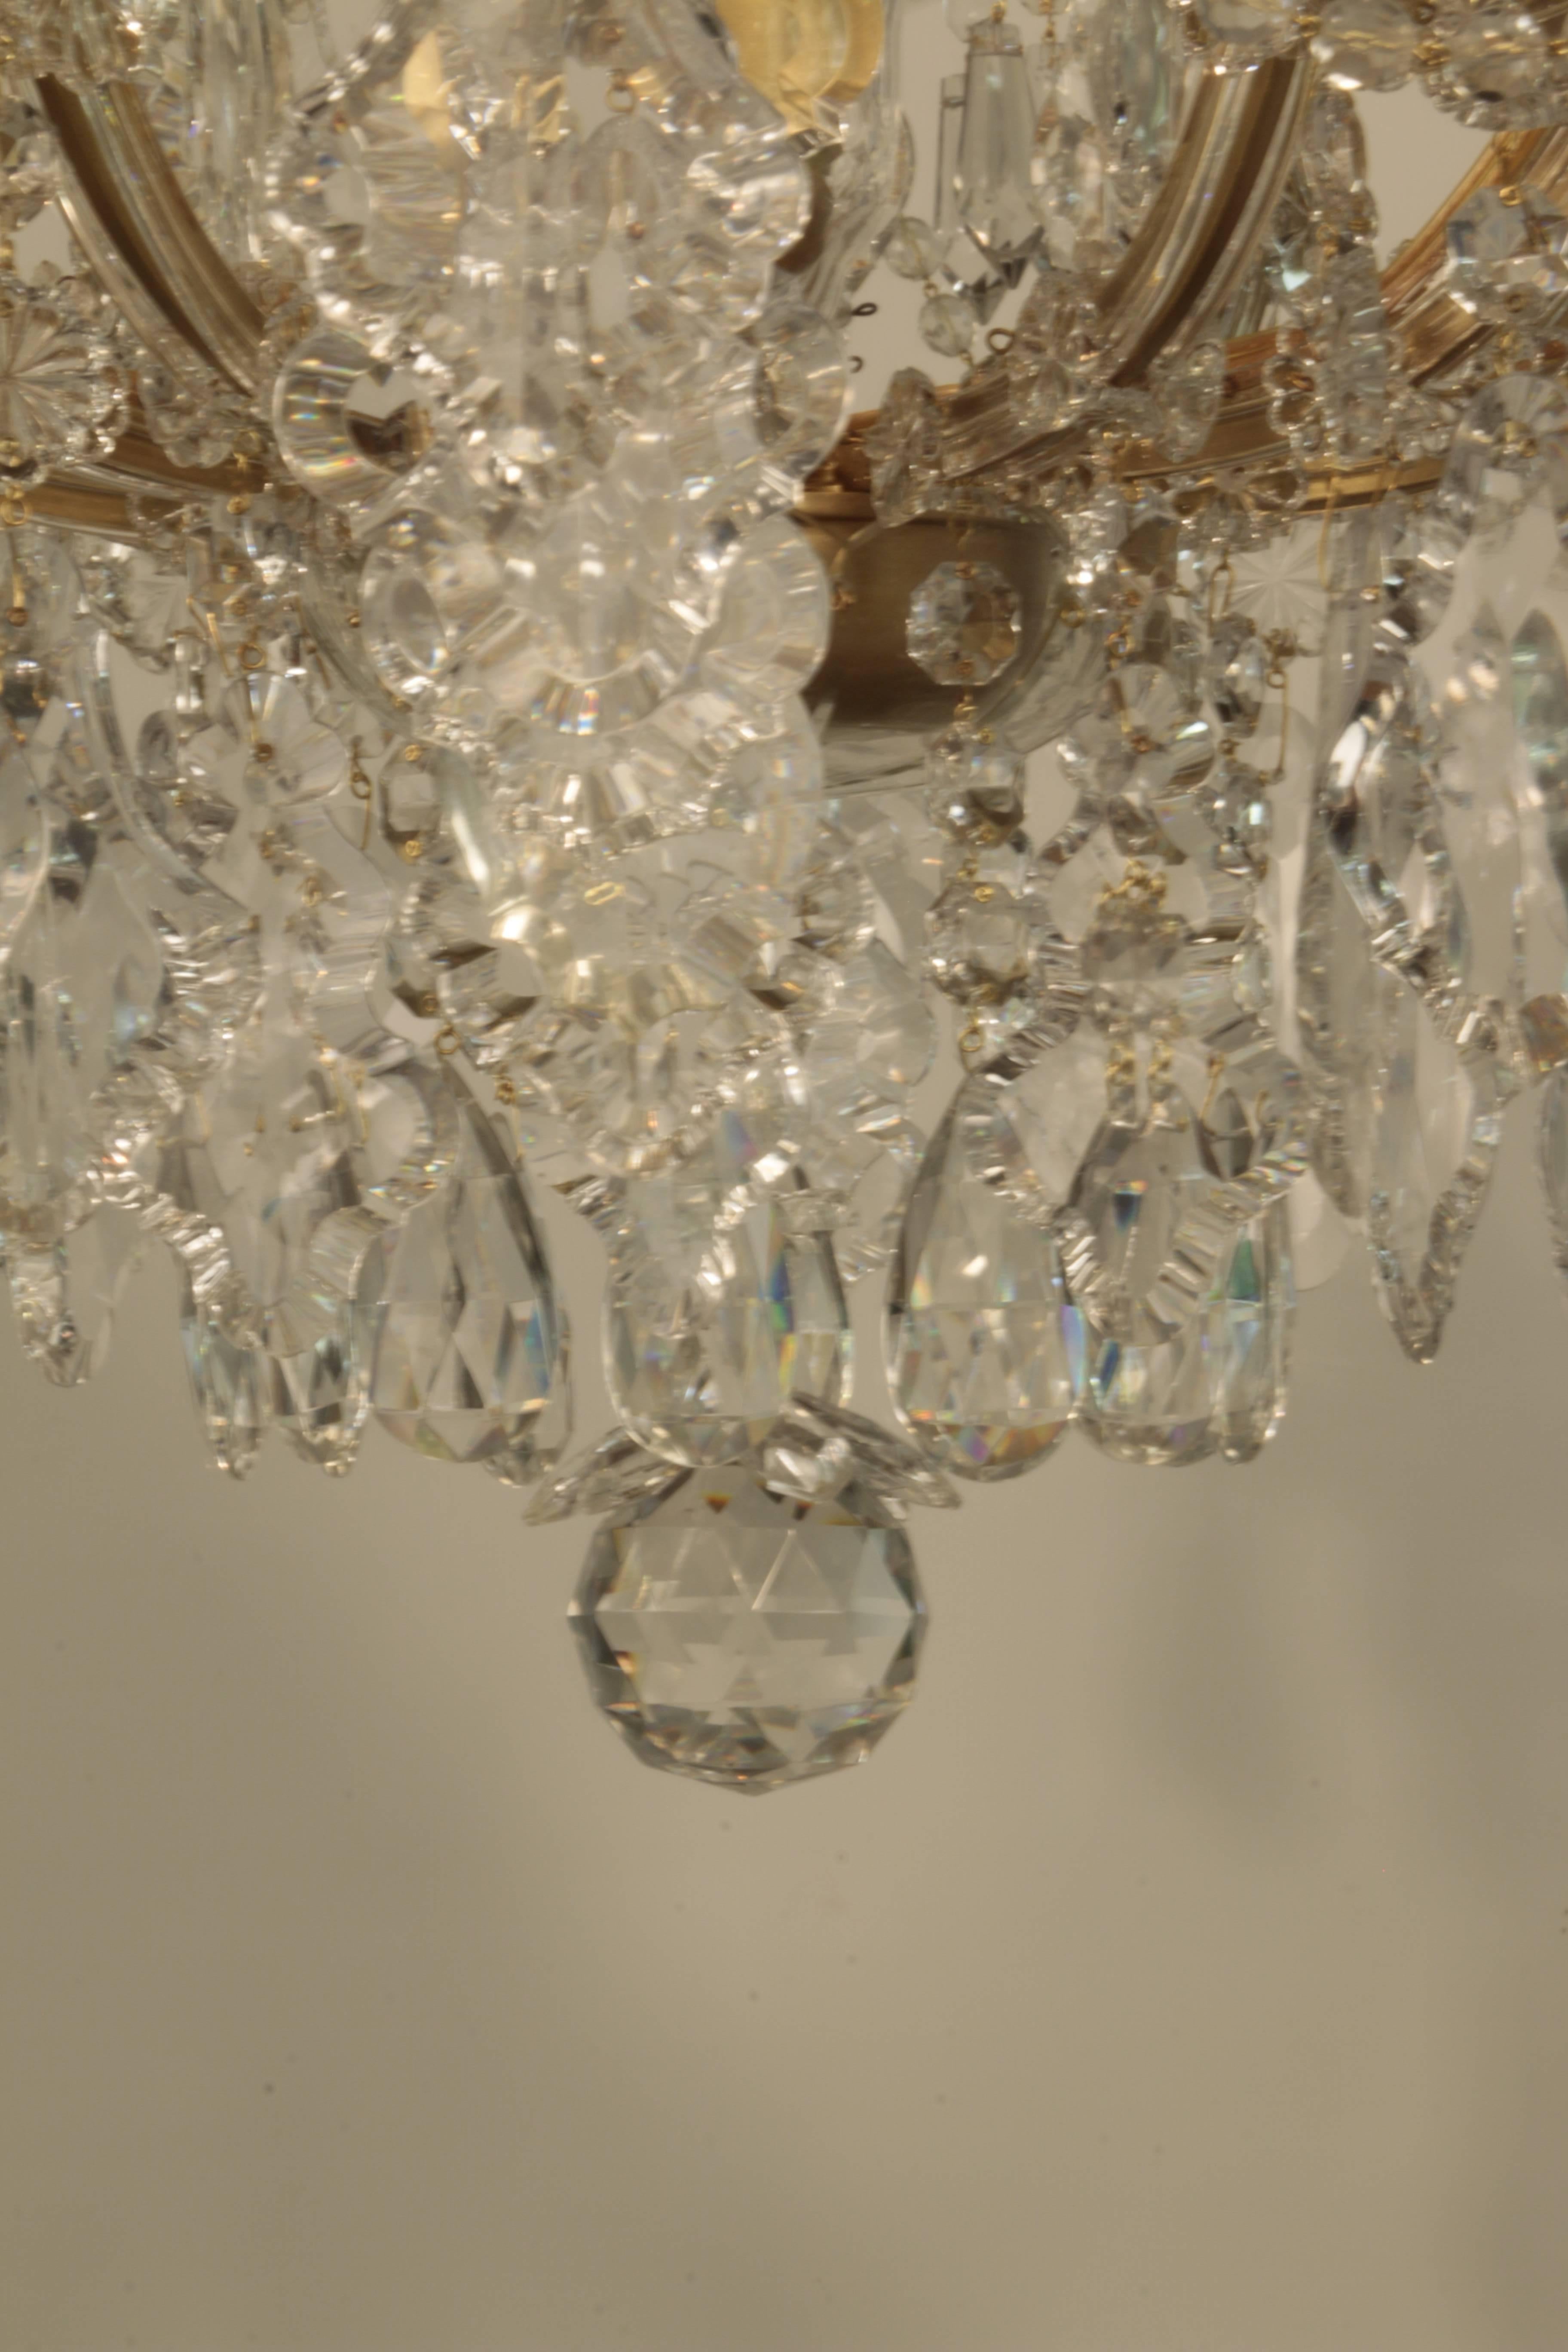 An unusually large vintage Czechoslovakian Marie-Therese cut crystal chandelier. The upper tier with 6 lights, the lower tier 12, the whole profusely hung with drops, hanging beads and French style pendaloques crystals.
Unusually, this wonderful